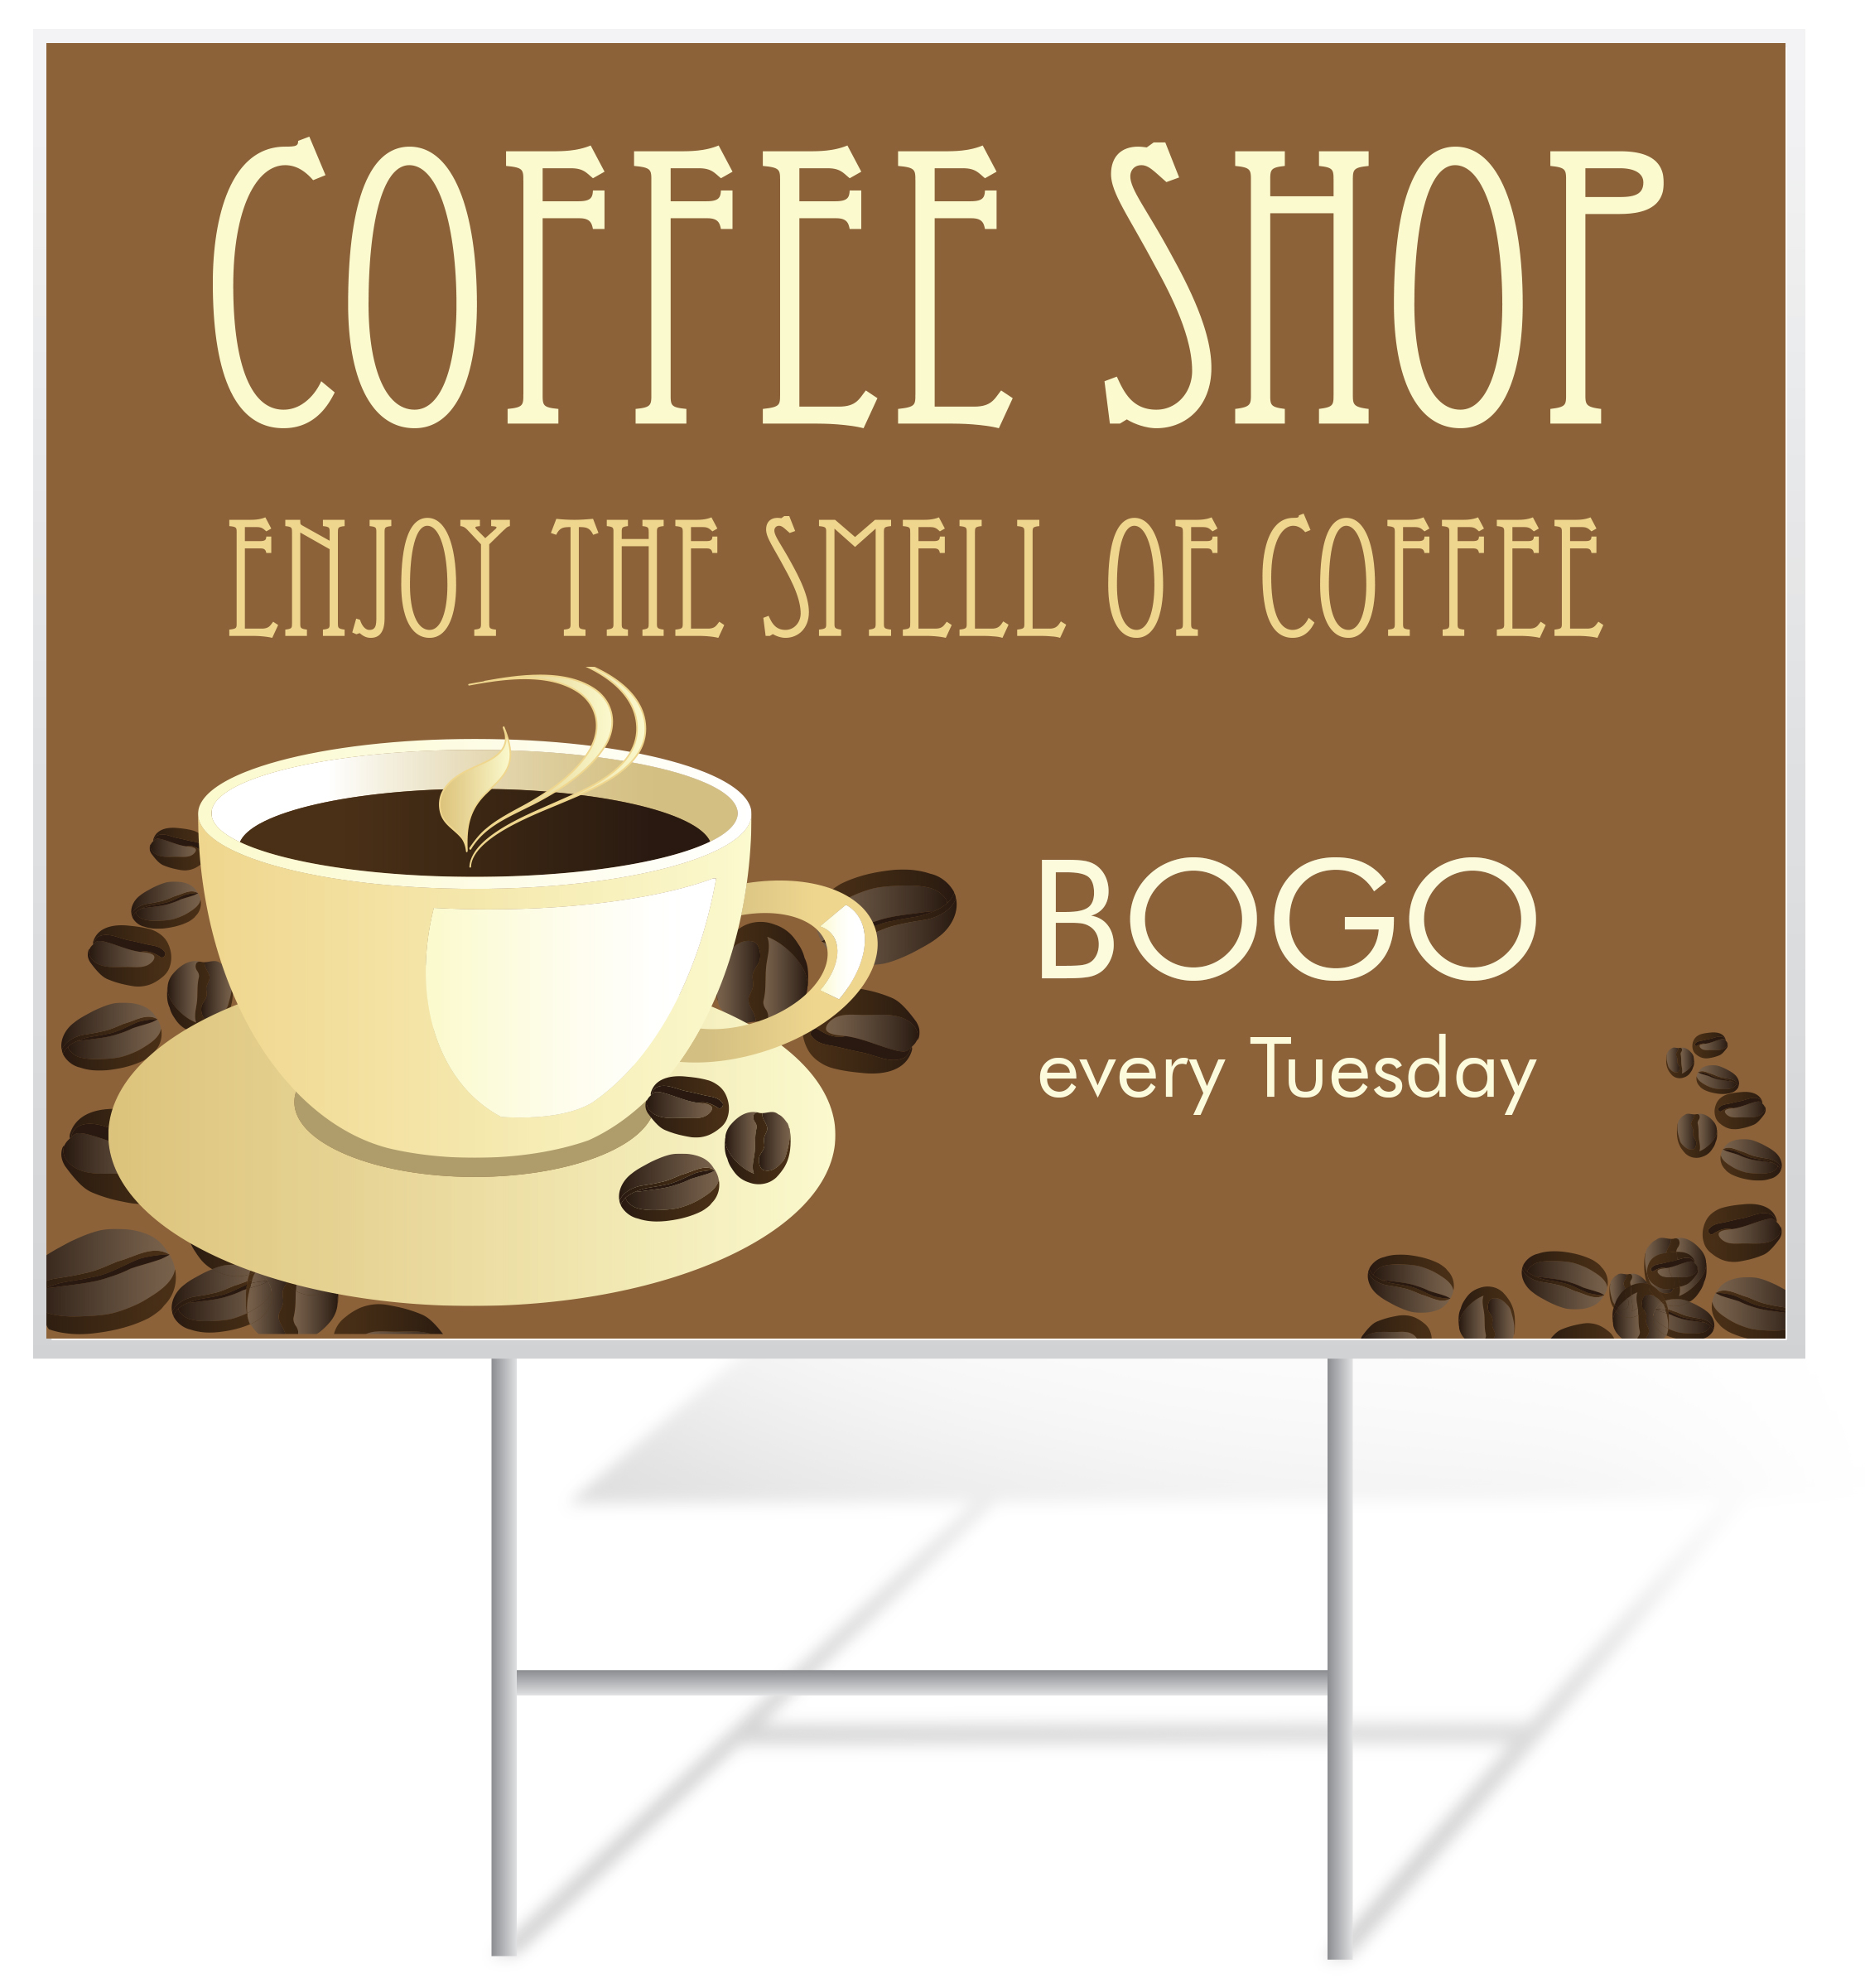 Coffee Shop Advertising Lawn Sign Example | LawnSigns.com